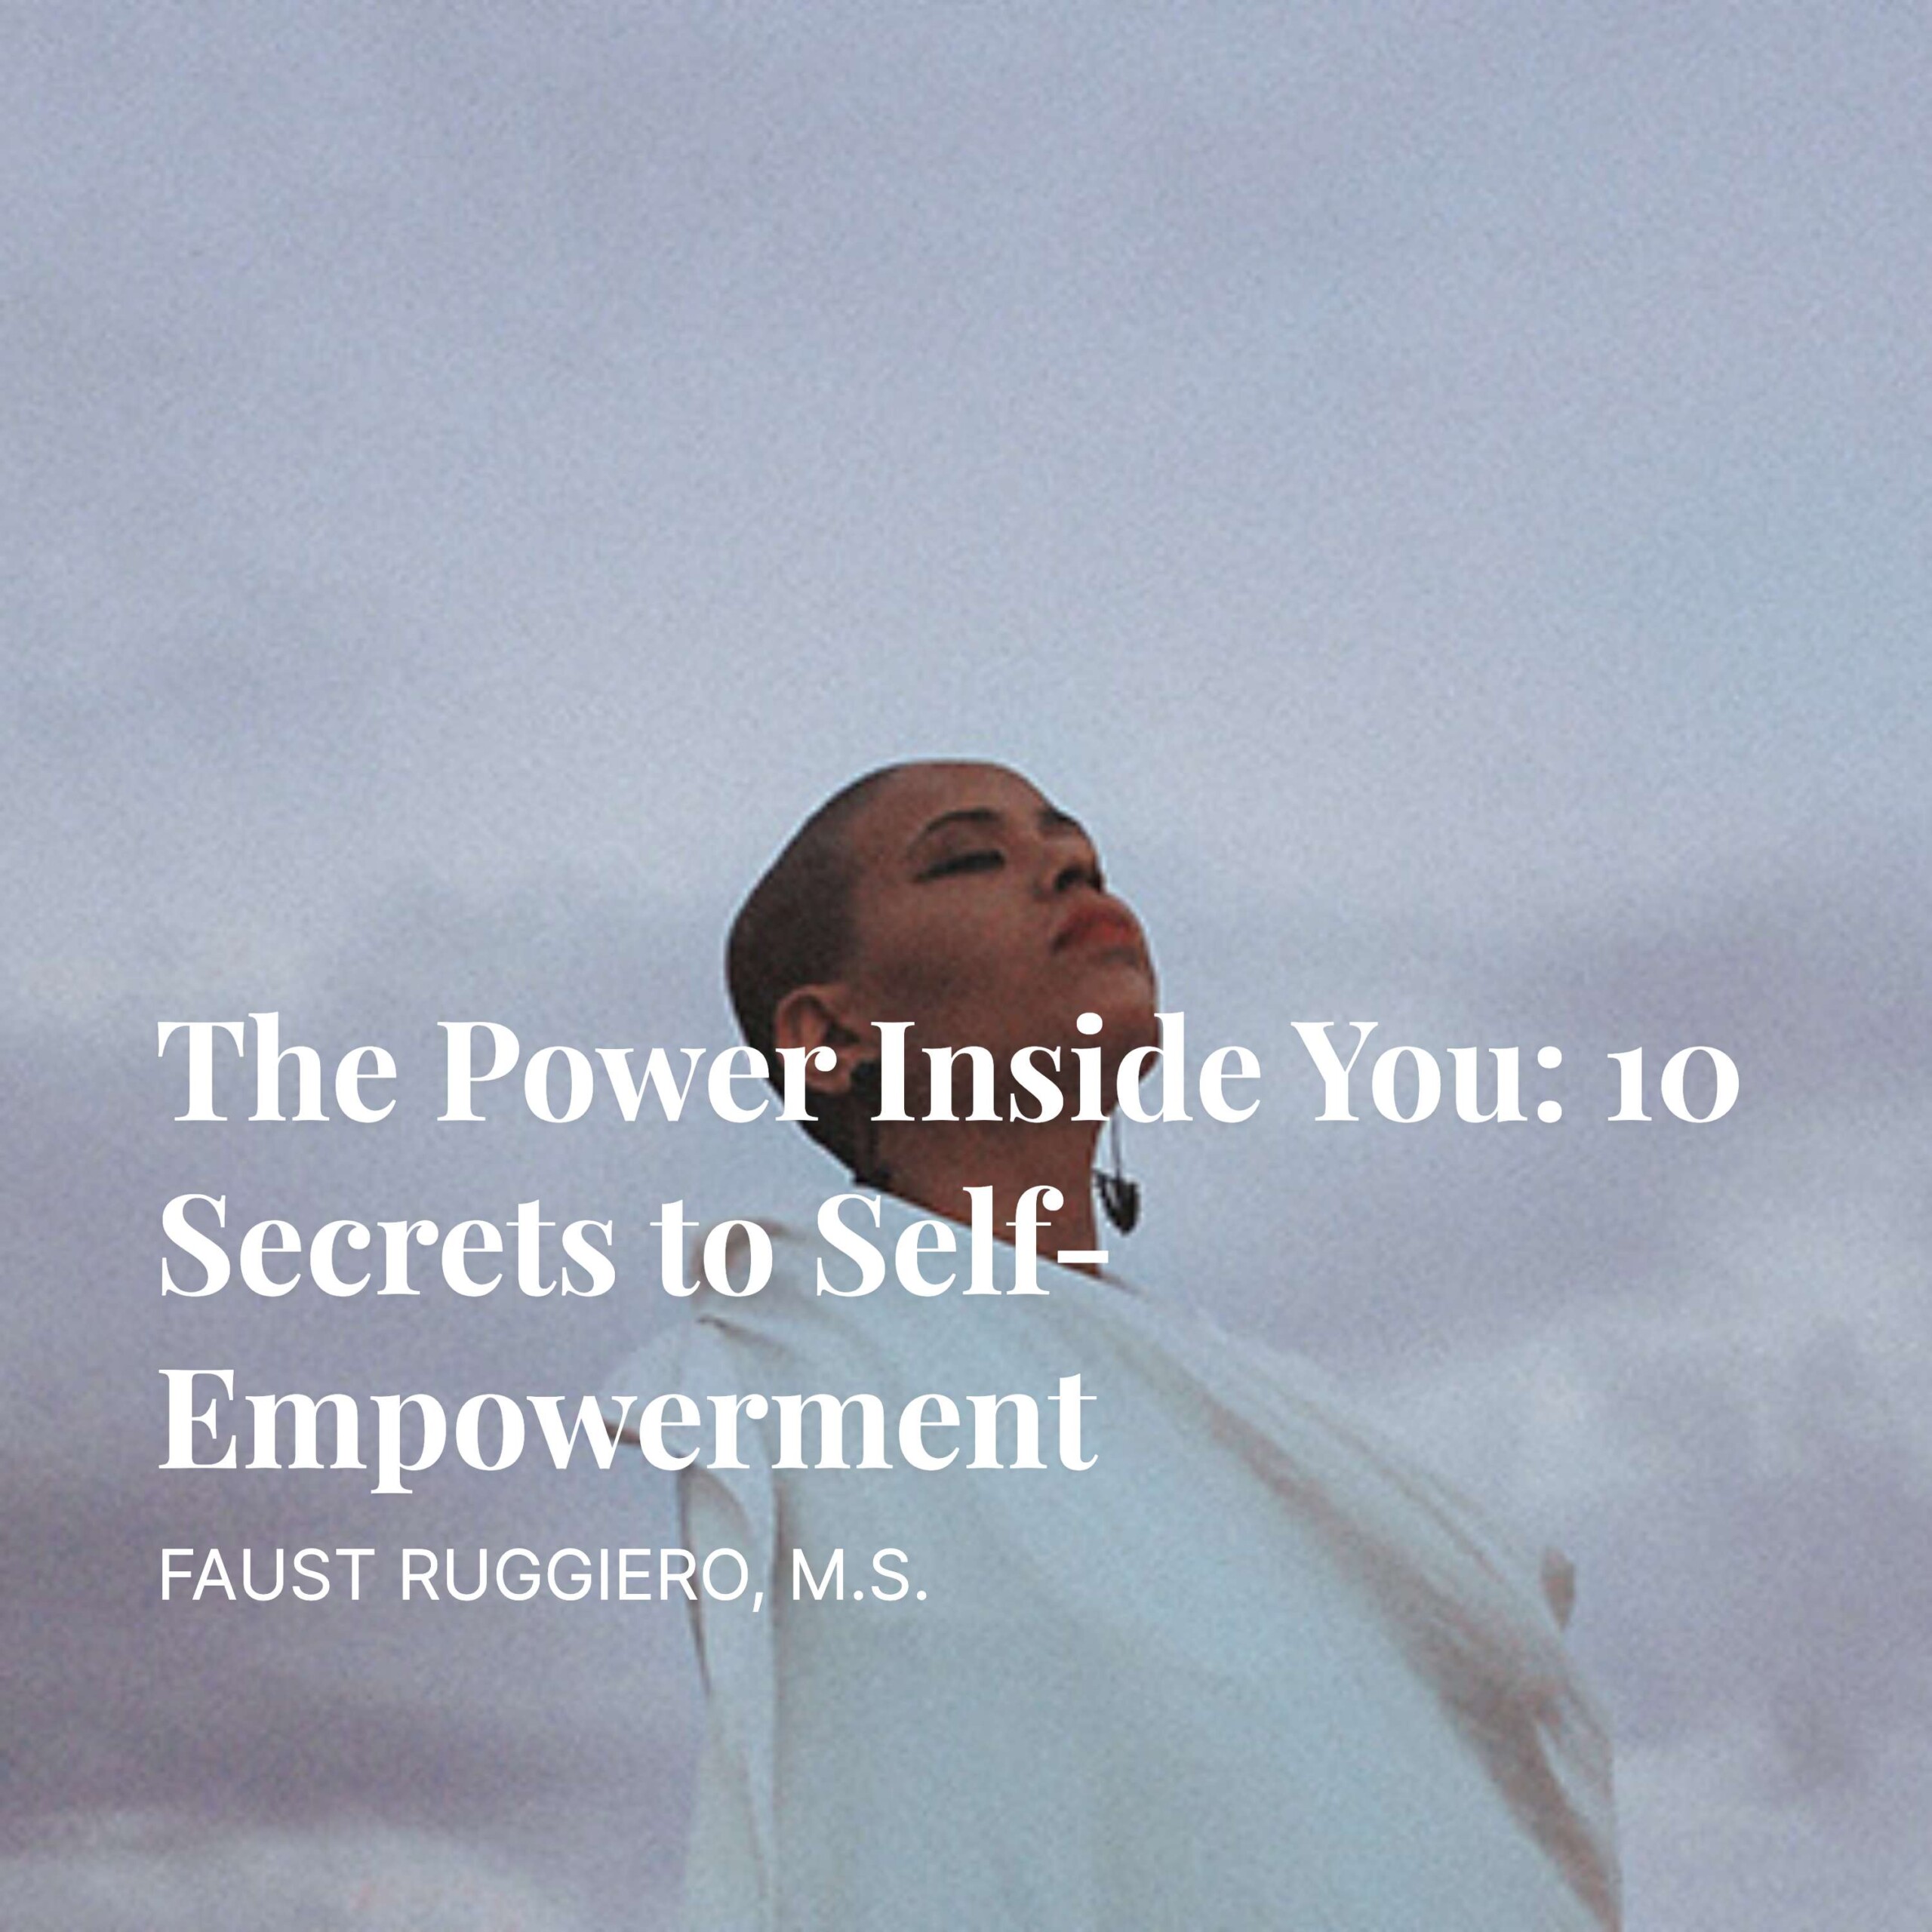 Podcast: Faust Ruggiero | The Power Inside You: 10 Secrets to Self-Empowerment